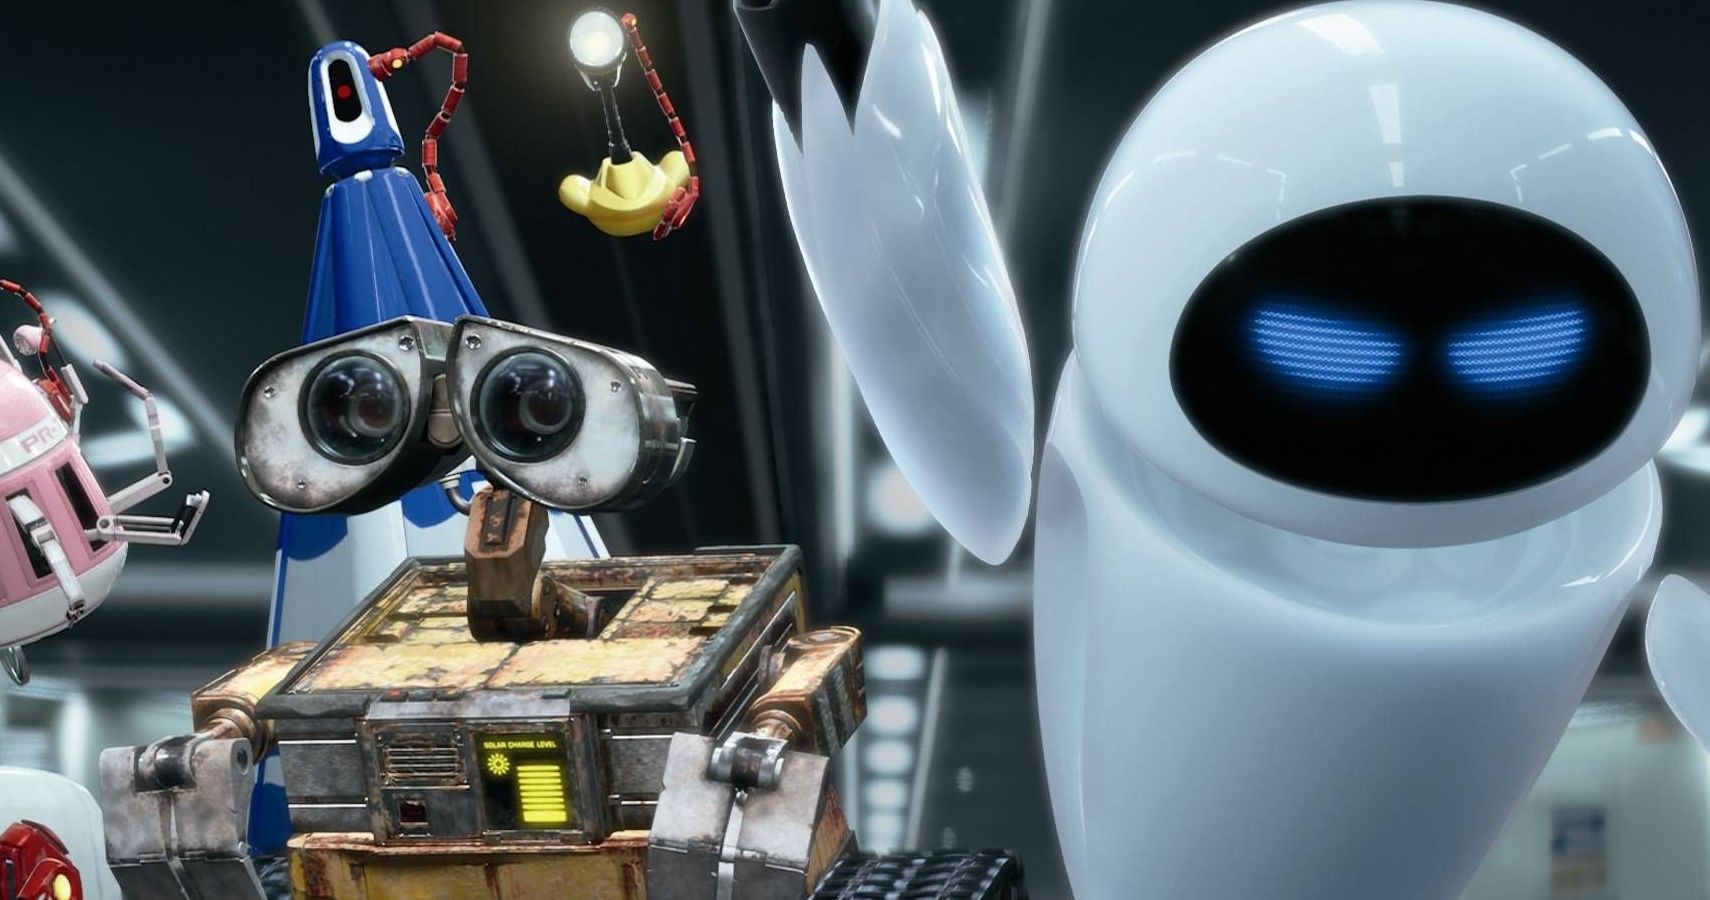 Wall-E: 5 Things It Got Right About The Future (& 5 It Got Wrong)